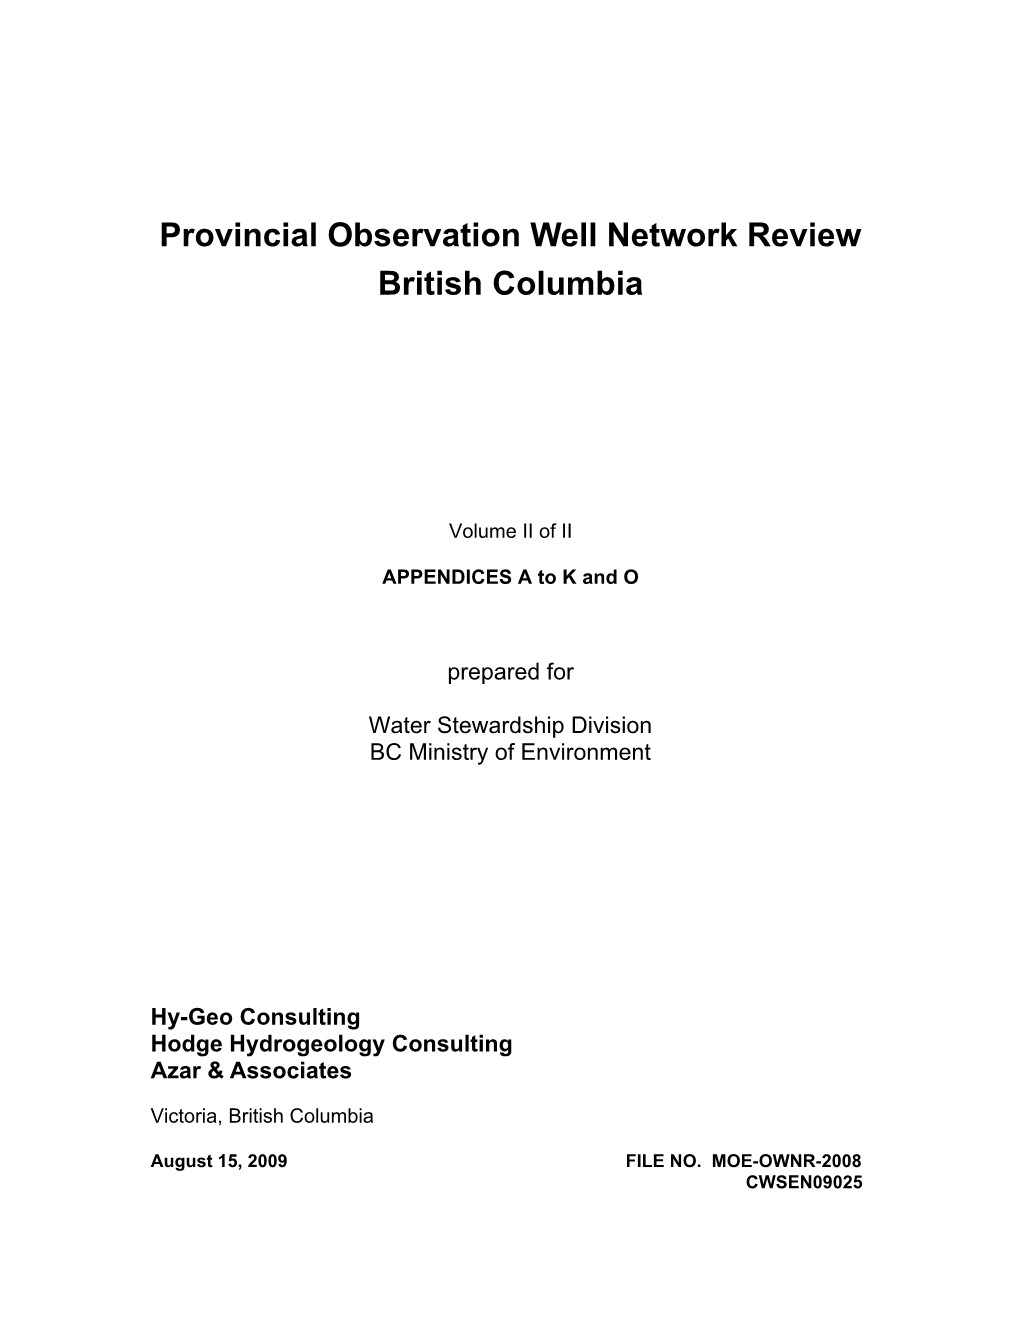 Provincial Observation Well Network Review British Columbia